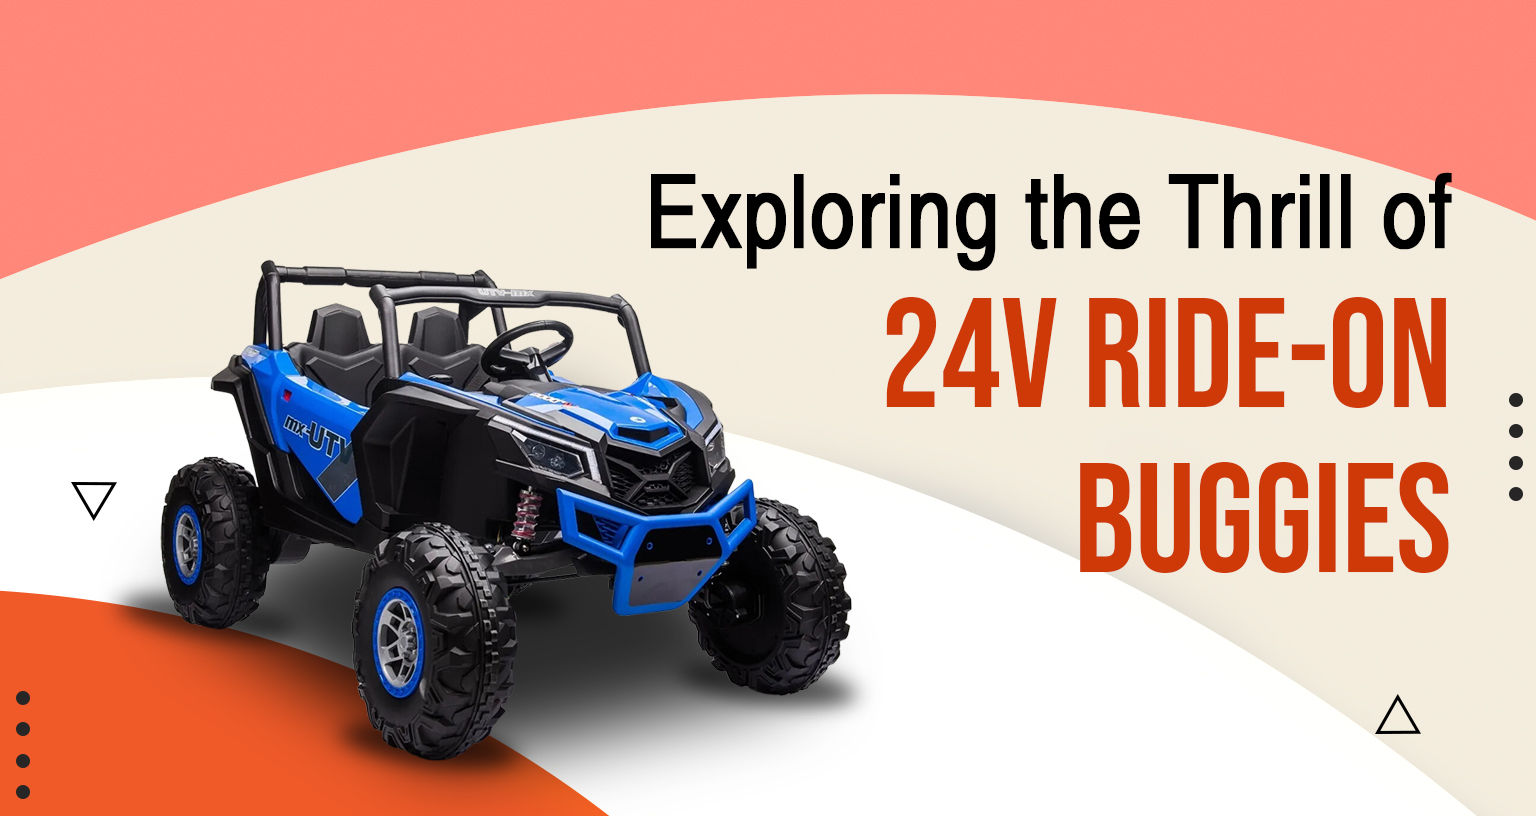 Unlock the Thrill of Ride-on Buggies 24v: Ultimate Outdoor Adventure for Kids